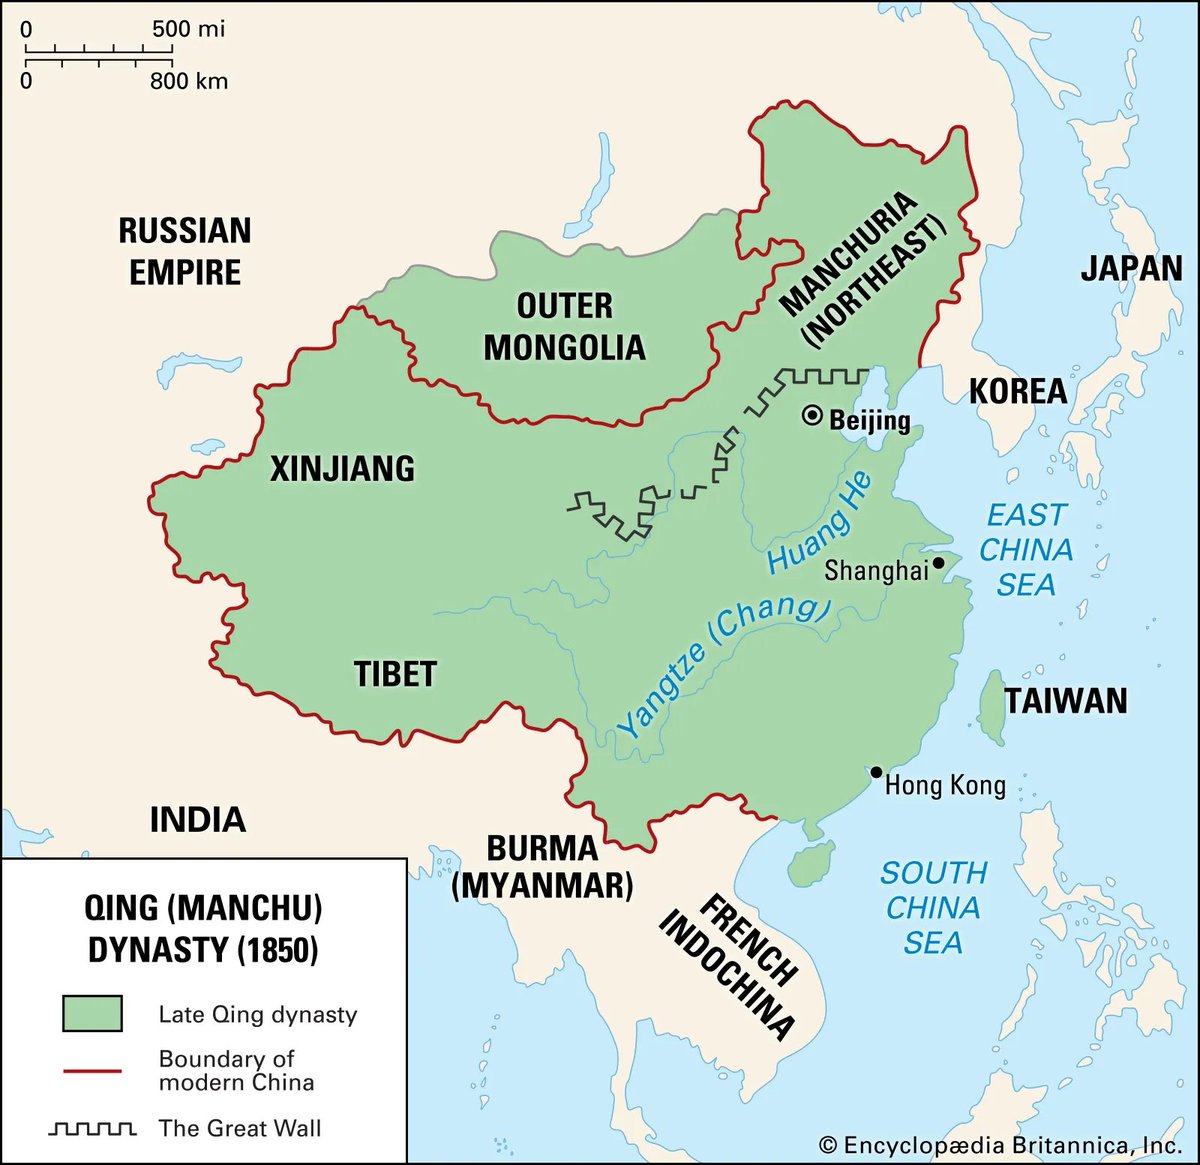 @CatcherDAO @ElbridgeColby The idea that China has no history of expansionist imperialism is hilarious.